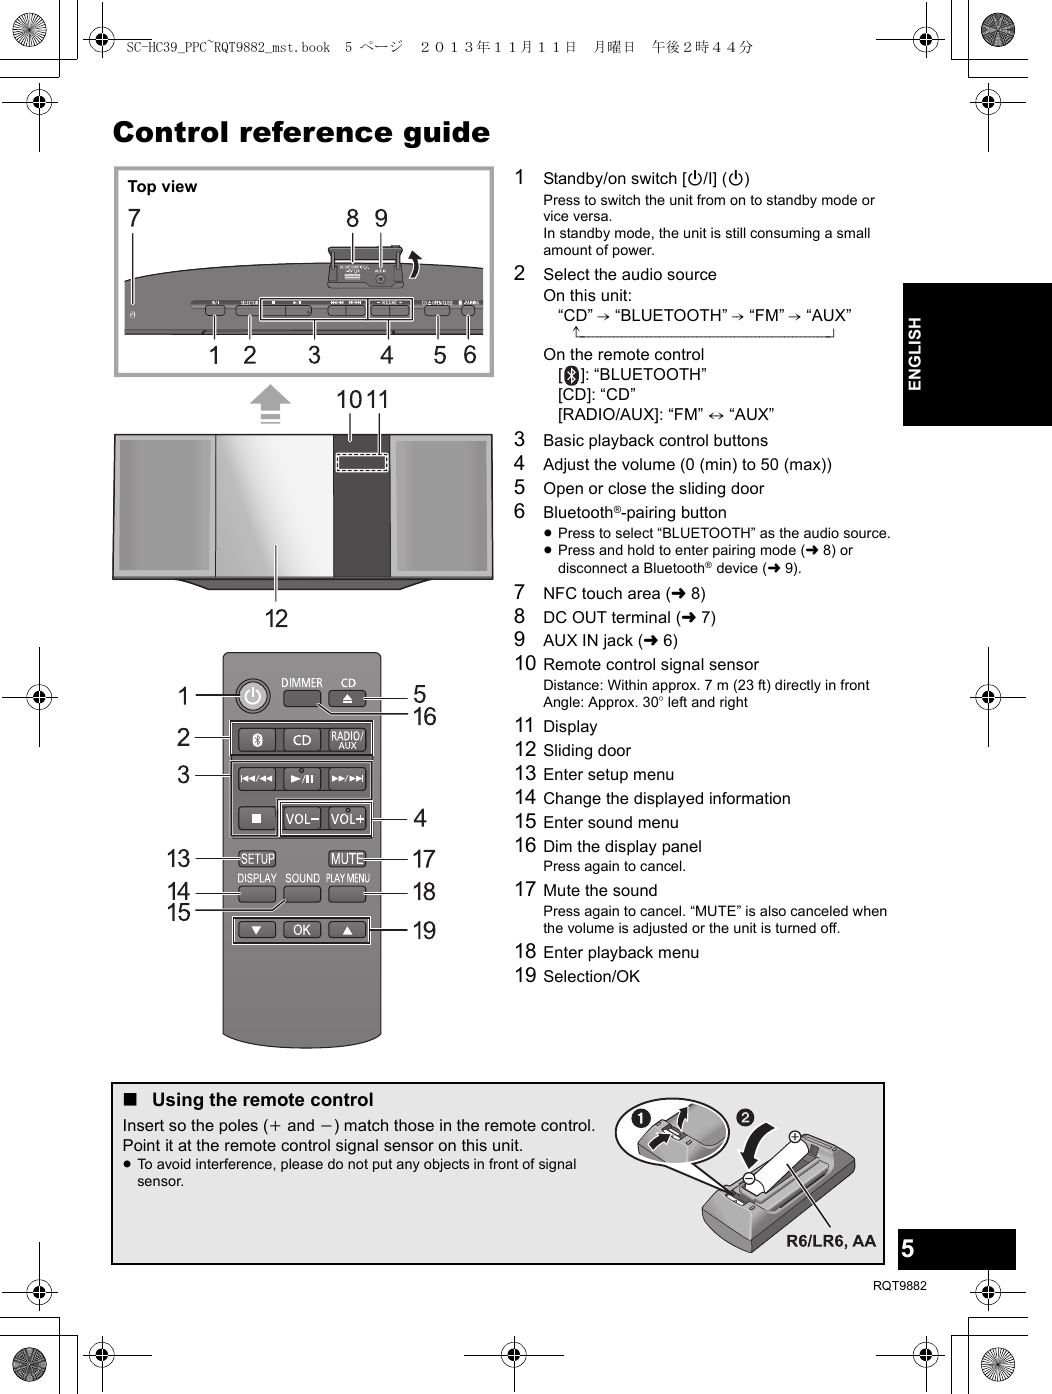 5RQT9882ENGLISHControl reference guide1Standby/on switch [Í/I] (Í)Press to switch the unit from on to standby mode or vice versa.In standby mode, the unit is still consuming a small amount of power.2Select the audio sourceOn this unit:“CD” -. “BLUETOOTH” -. “FM” -. “AUX”^------------------------------------------------------------nOn the remote control[ ]: “BLUETOOTH”[CD]: “CD”[RADIO/AUX]: “FM” ,. “AUX”3Basic playback control buttons4Adjust the volume (0 (min) to 50 (max))5Open or close the sliding door6Bluetooth®-pairing button≥Press to select “BLUETOOTH” as the audio source.≥Press and hold to enter pairing mode (l8) or disconnect a Bluetooth® device (l9).7NFC touch area (l8)8DC OUT terminal (l7)9AUX IN jack (l6)10 Remote control signal sensorDistance: Within approx. 7 m (23 ft) directly in frontAngle: Approx. 30o left and right11 Display12 Sliding door13 Enter setup menu14 Change the displayed information15 Enter sound menu16 Dim the display panelPress again to cancel.17 Mute the soundPress again to cancel. “MUTE” is also canceled when the volume is adjusted or the unit is turned off.18 Enter playback menu19 Selection/OKTop view∫Using the remote controlInsert so the poles (i and j) match those in the remote control.Point it at the remote control signal sensor on this unit.≥To avoid interference, please do not put any objects in front of signal sensor.SC-HC39_PPC~RQT9882_mst.book  5 ページ  ２０１３年１１月１１日　月曜日　午後２時４４分